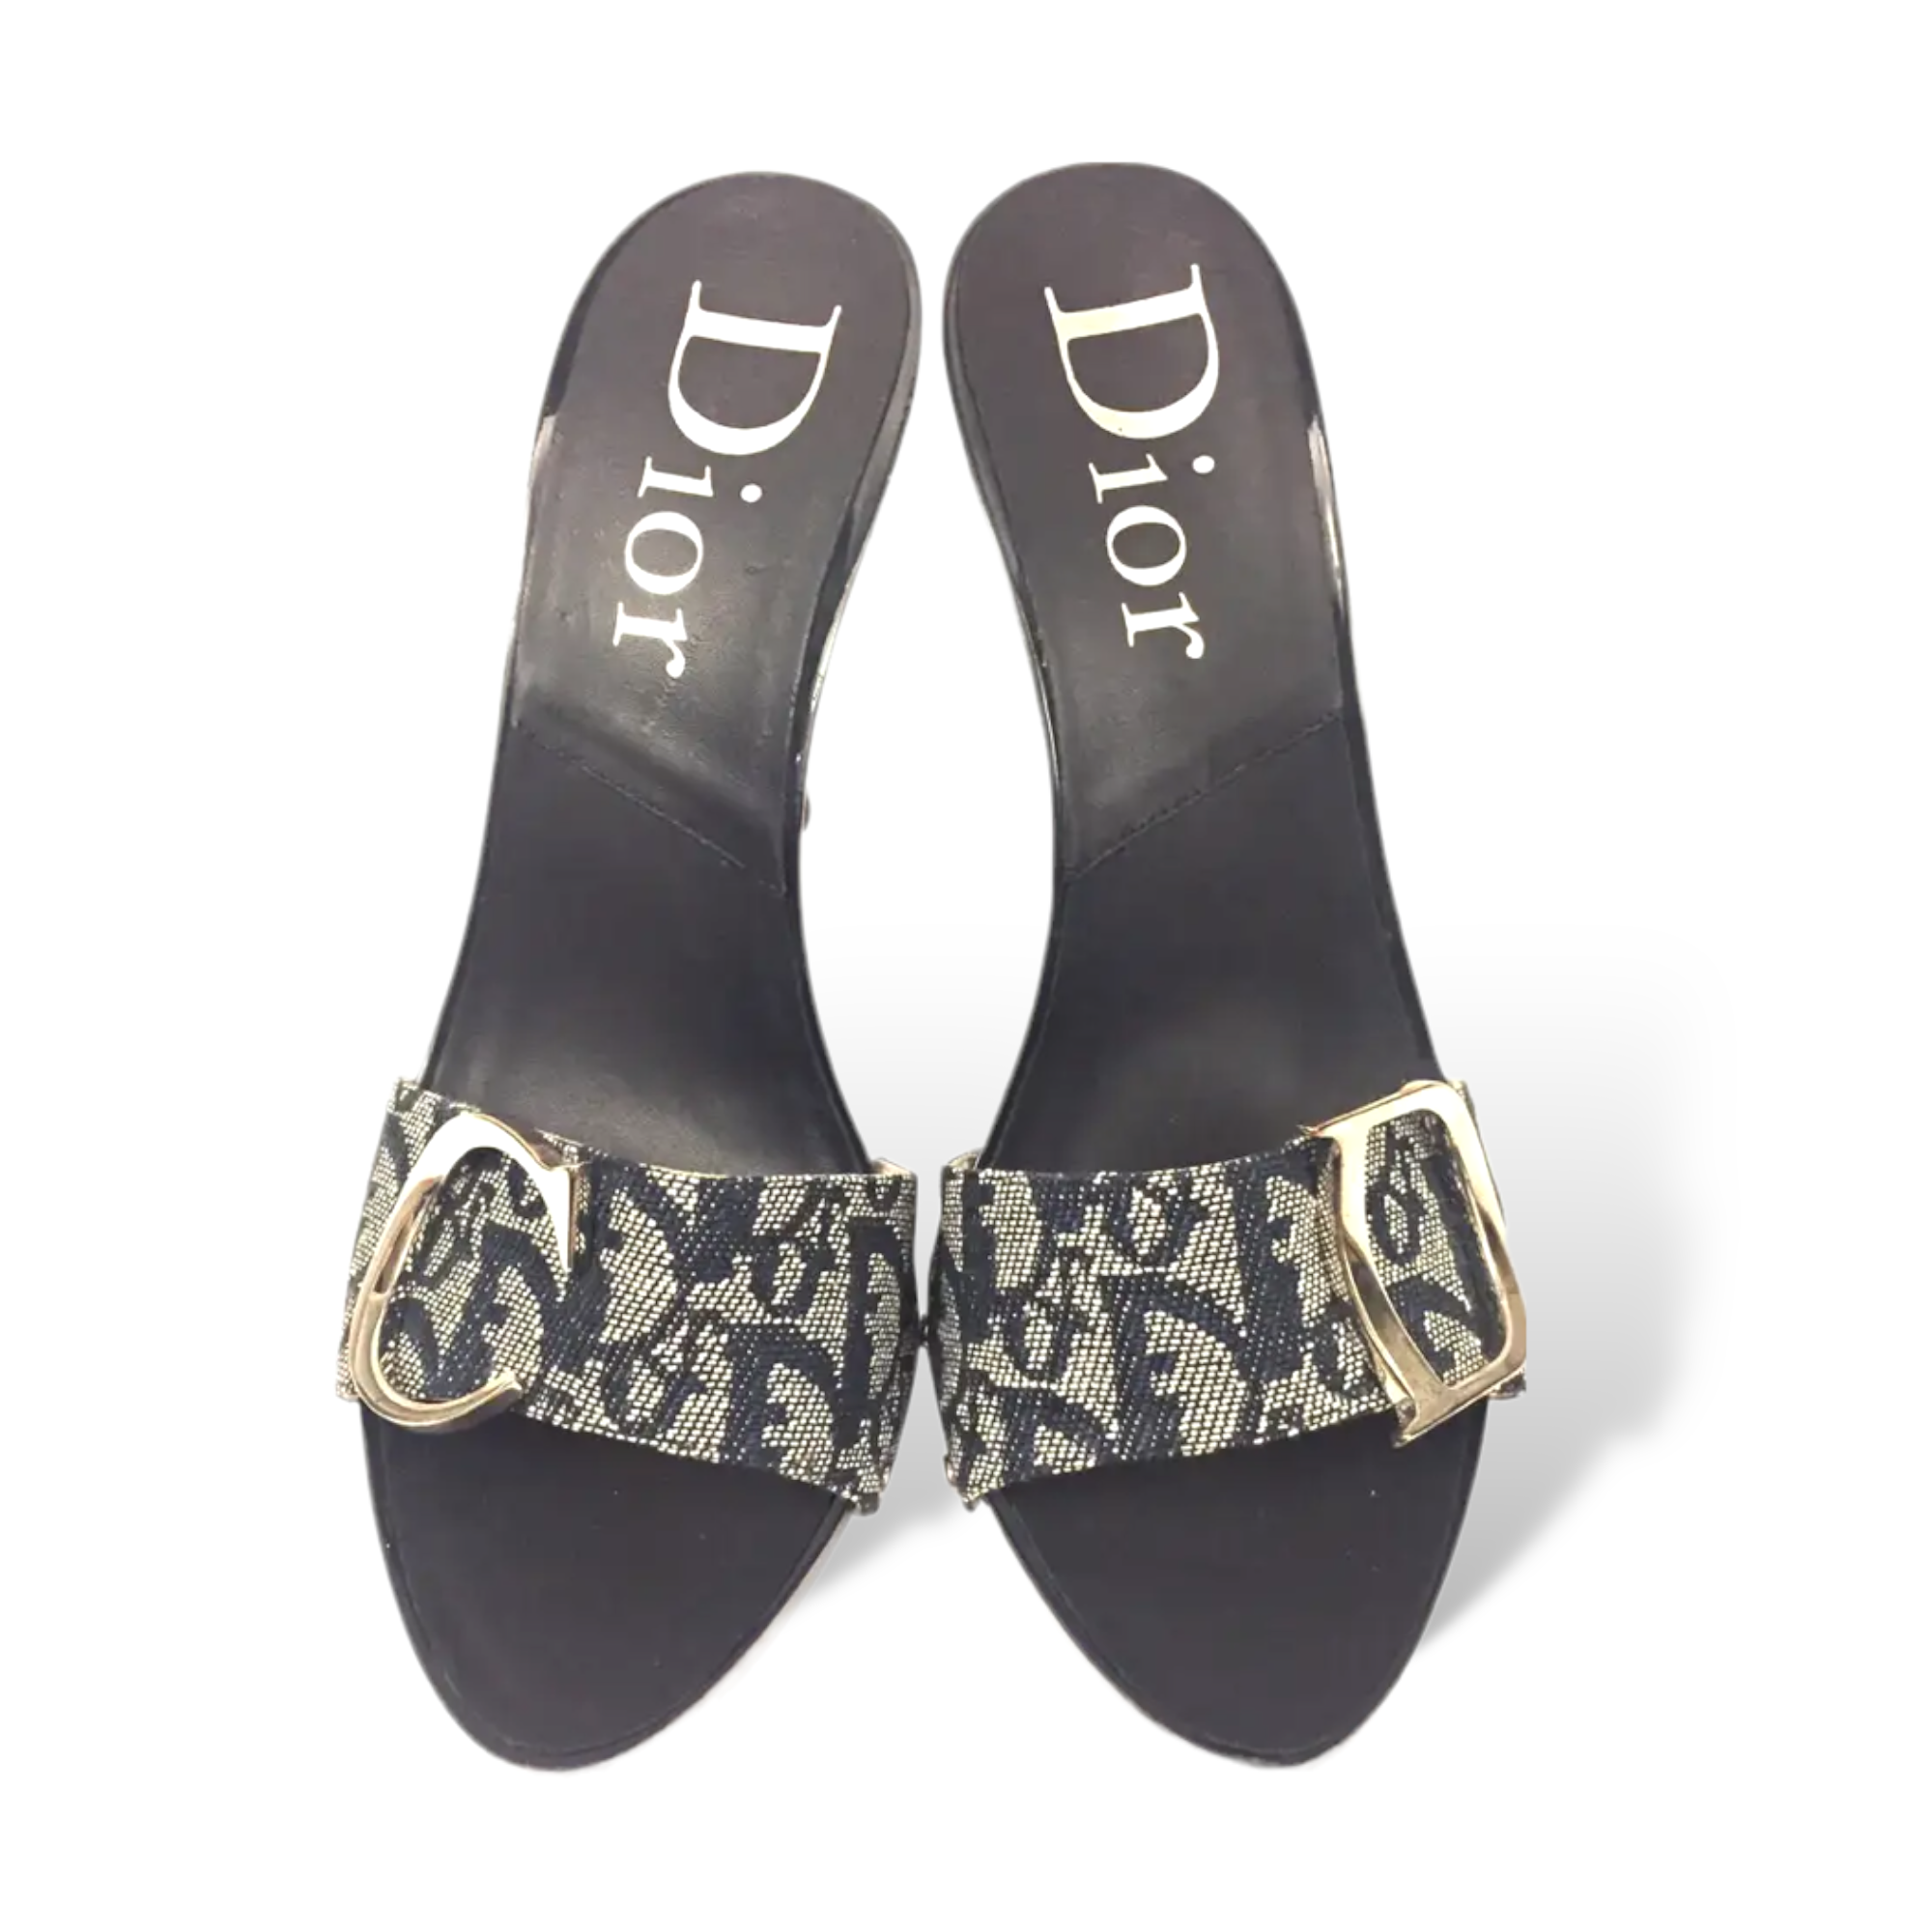 CHRISTIAN DIOR Monogram Trotter Mule Heels with Large Silver C & D Detail EU39